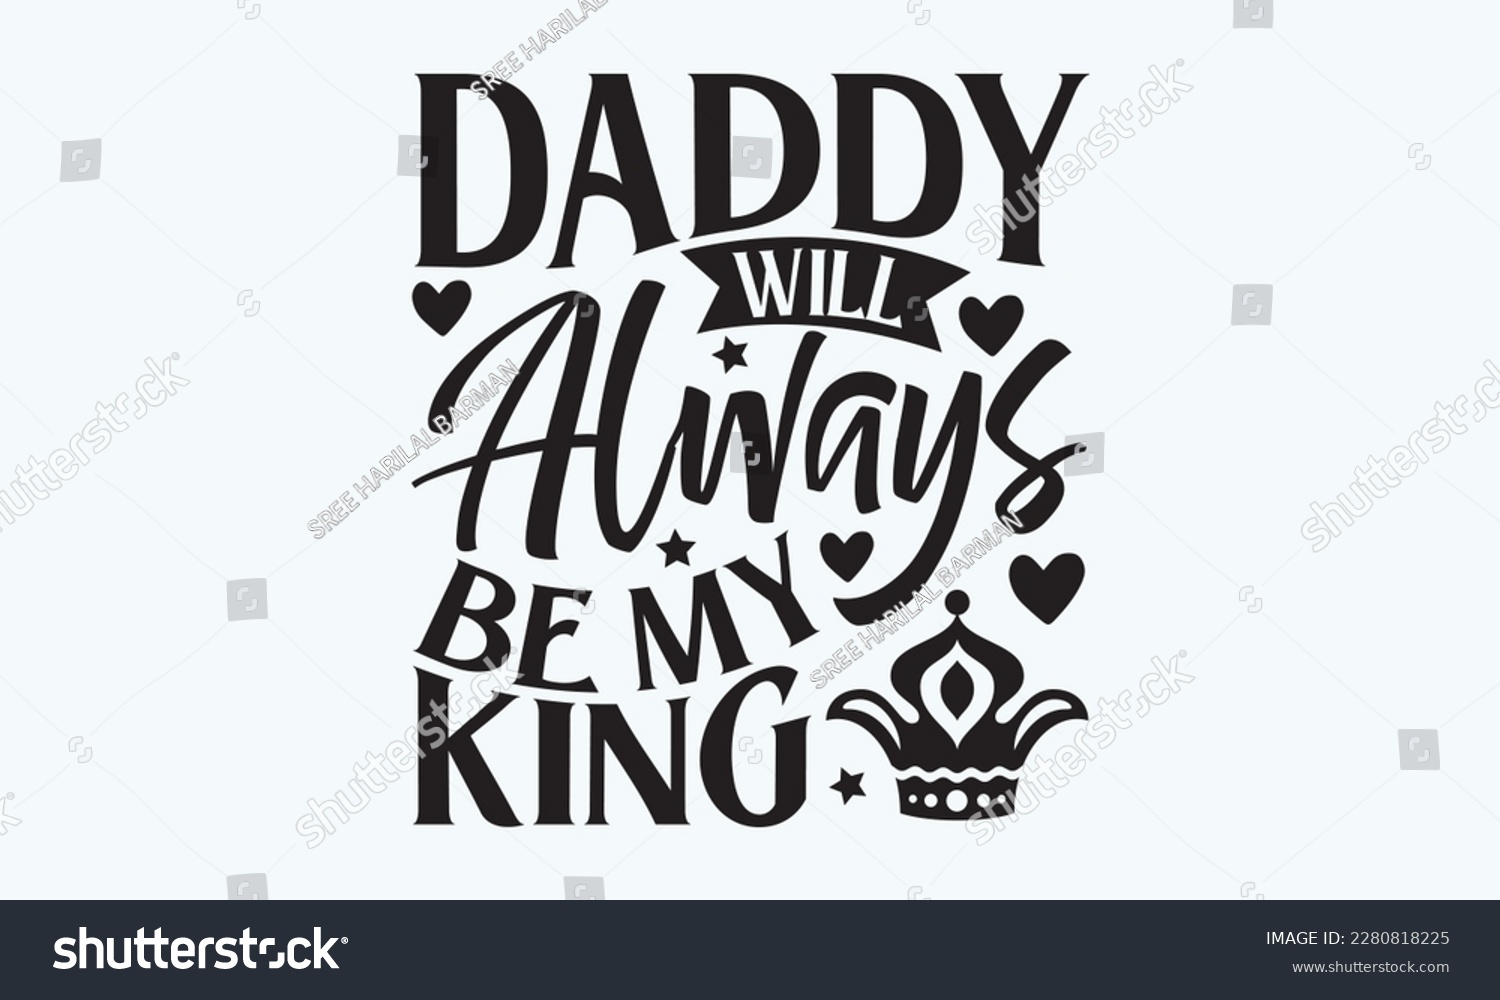 SVG of Daddy will always be my King - Father's day Svg typography t-shirt design, svg Files for Cutting Cricut and Silhouette, card, template Hand drawn lettering phrase, Calligraphy t-shirt design, eps 10. svg